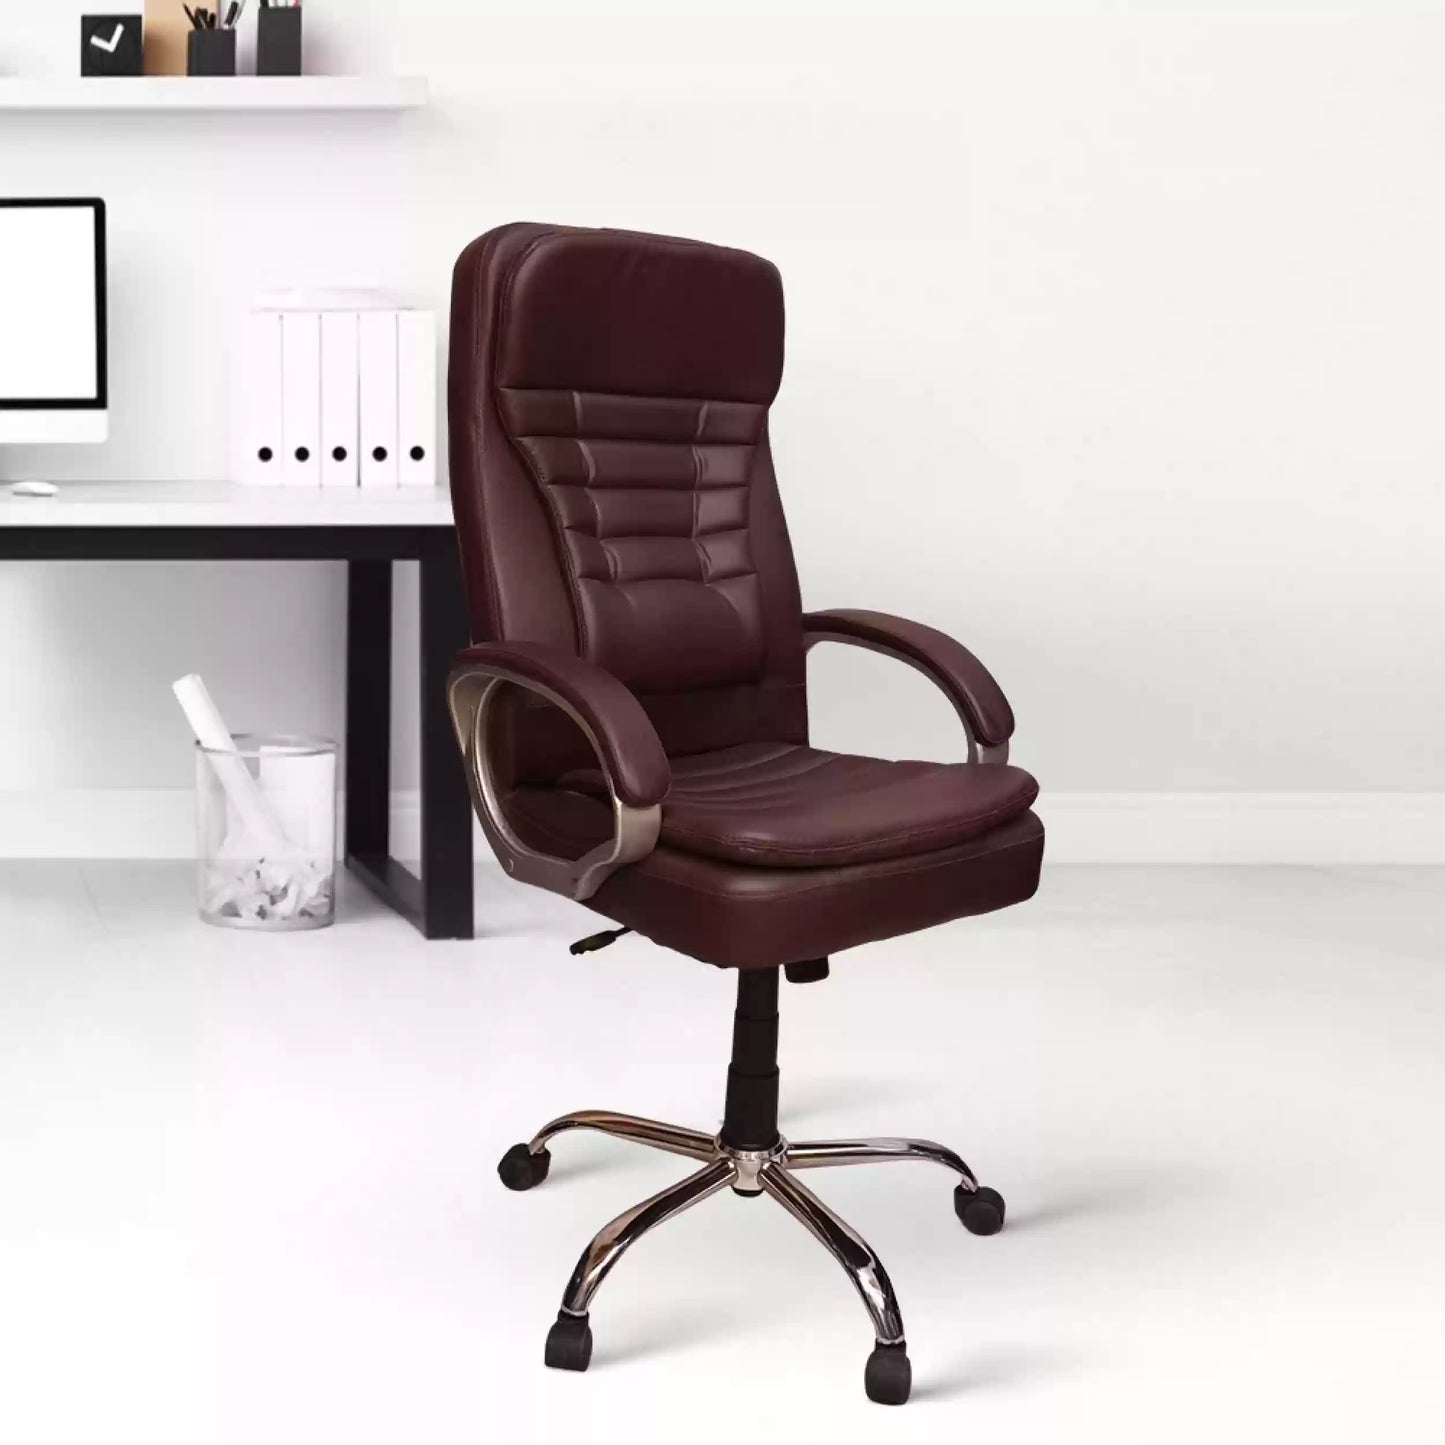 Office Chair Ergonomic Desk Chair, Mesh Computer Chair Armrest Executive Rolling Swivel Adjustable Mid Back Task Chair for Men and Women (Brown)